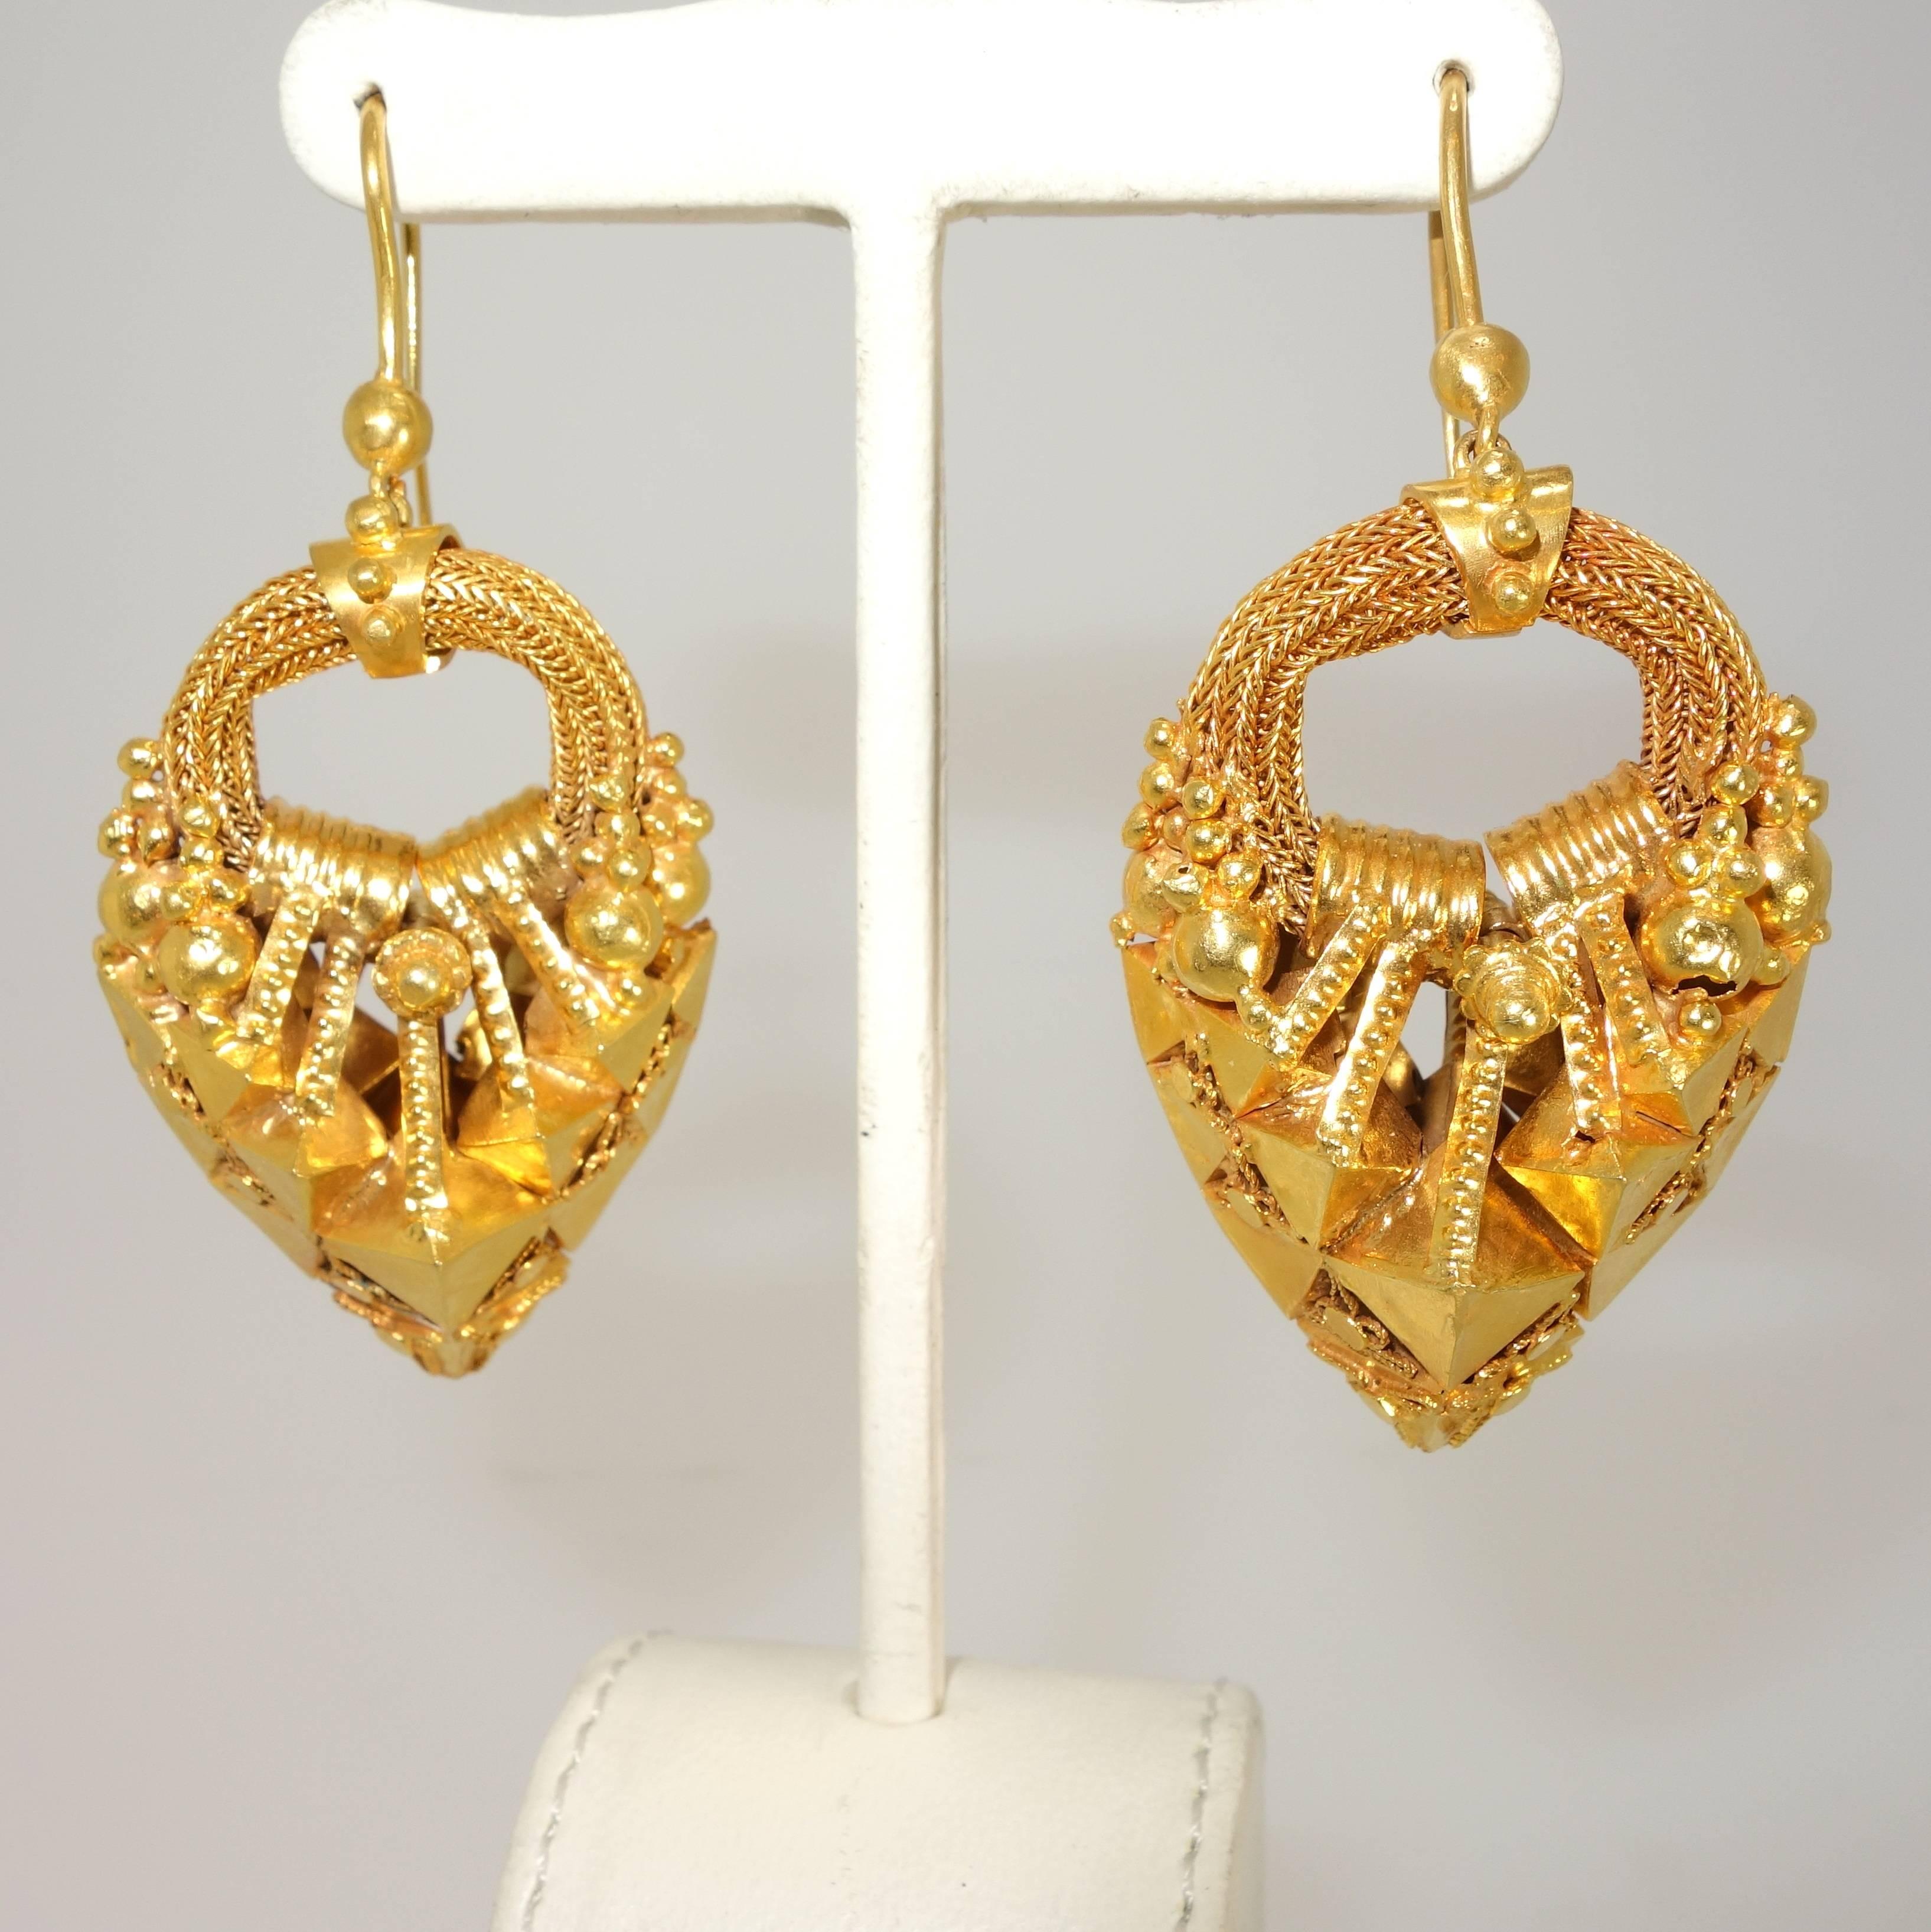 Hand made in the last quarter of the 19th century and in 22K, these basket motif earrings are probably European and  Greek or Roman revival.  They are light weight and thus easy to wear.  They are in good condition given their age, but there is some